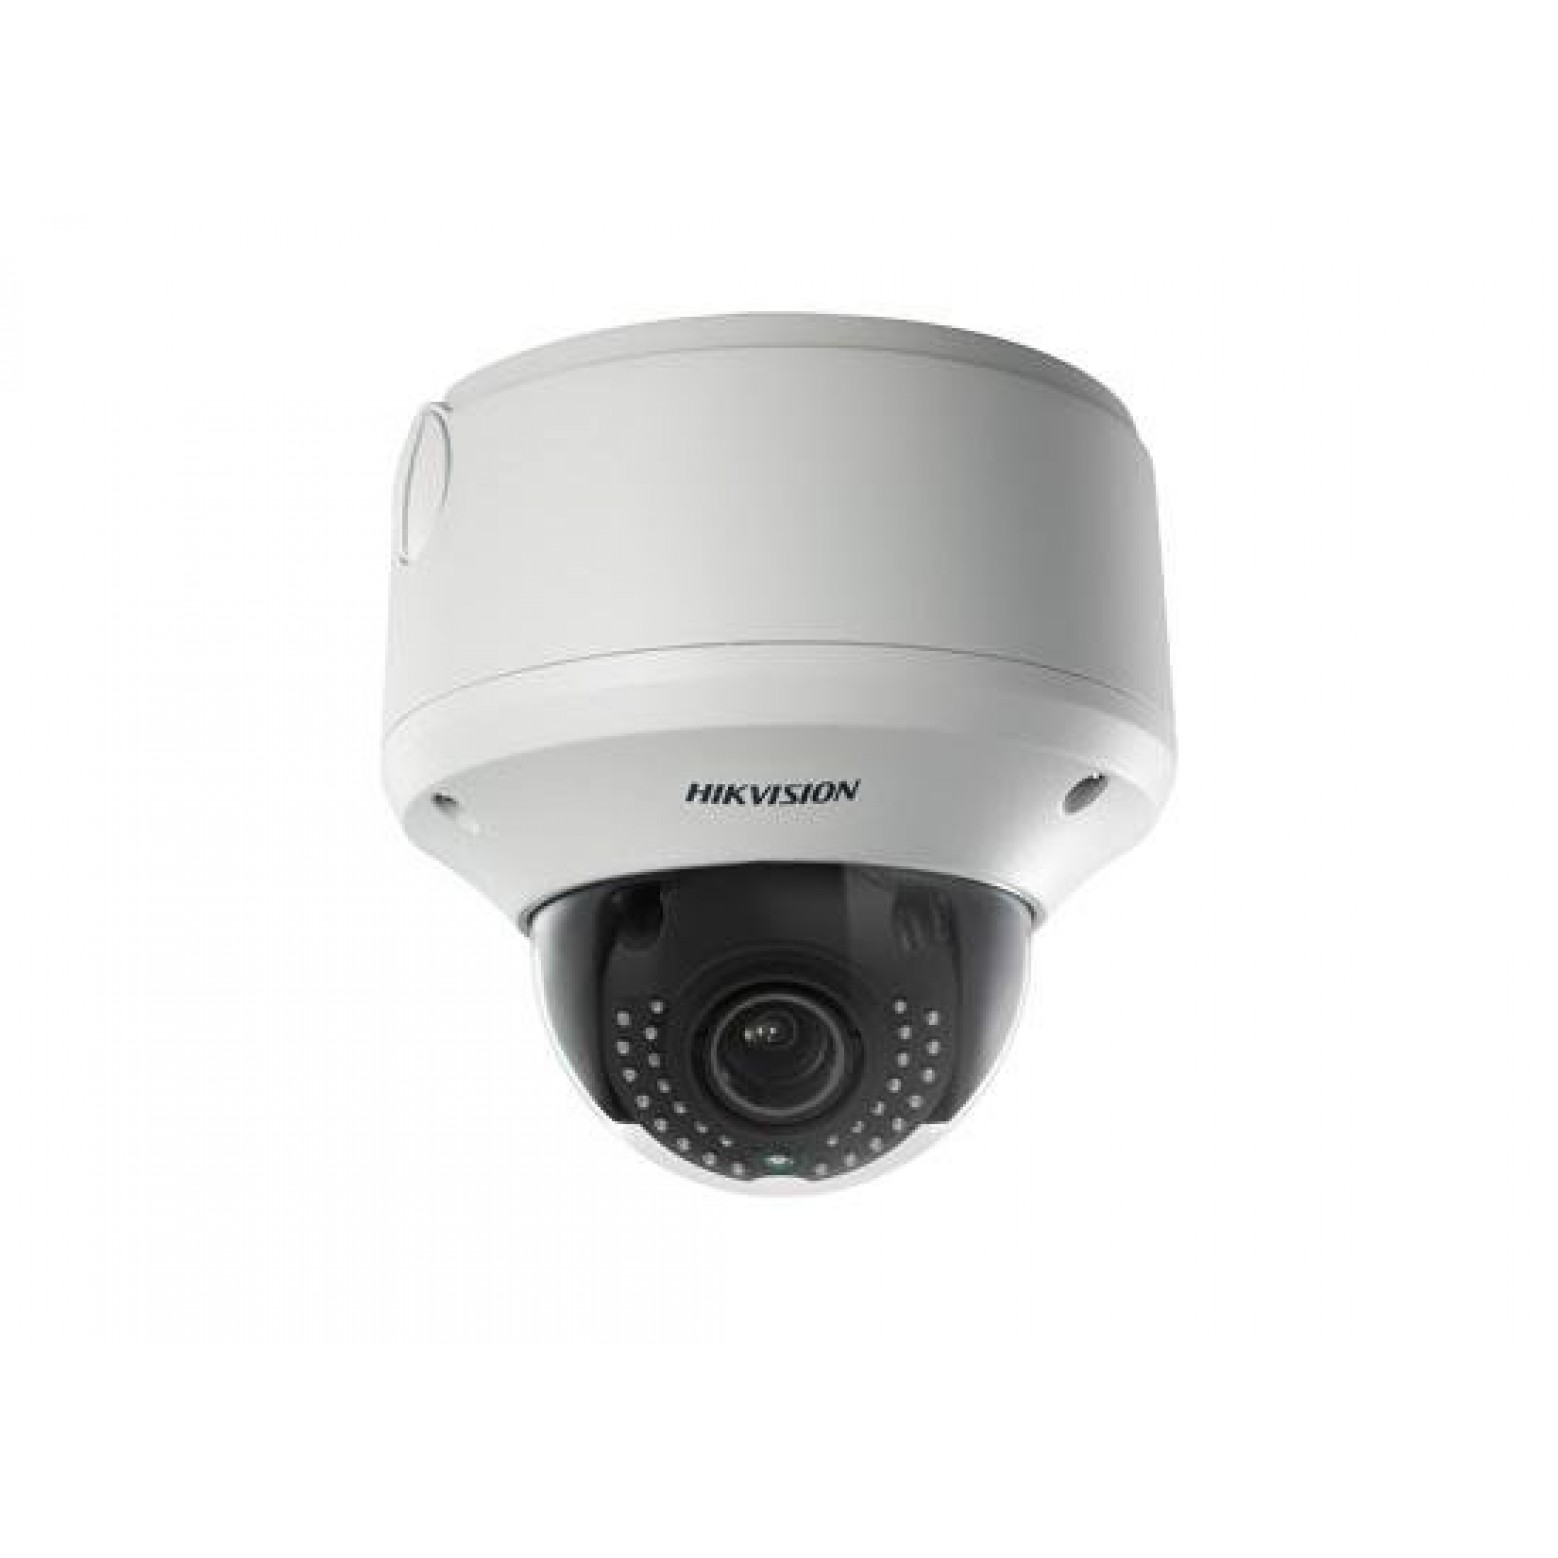 Hikvision DS-2CD4324F-IZS, 2,8 tot 12mm, 2MP, motorzoom